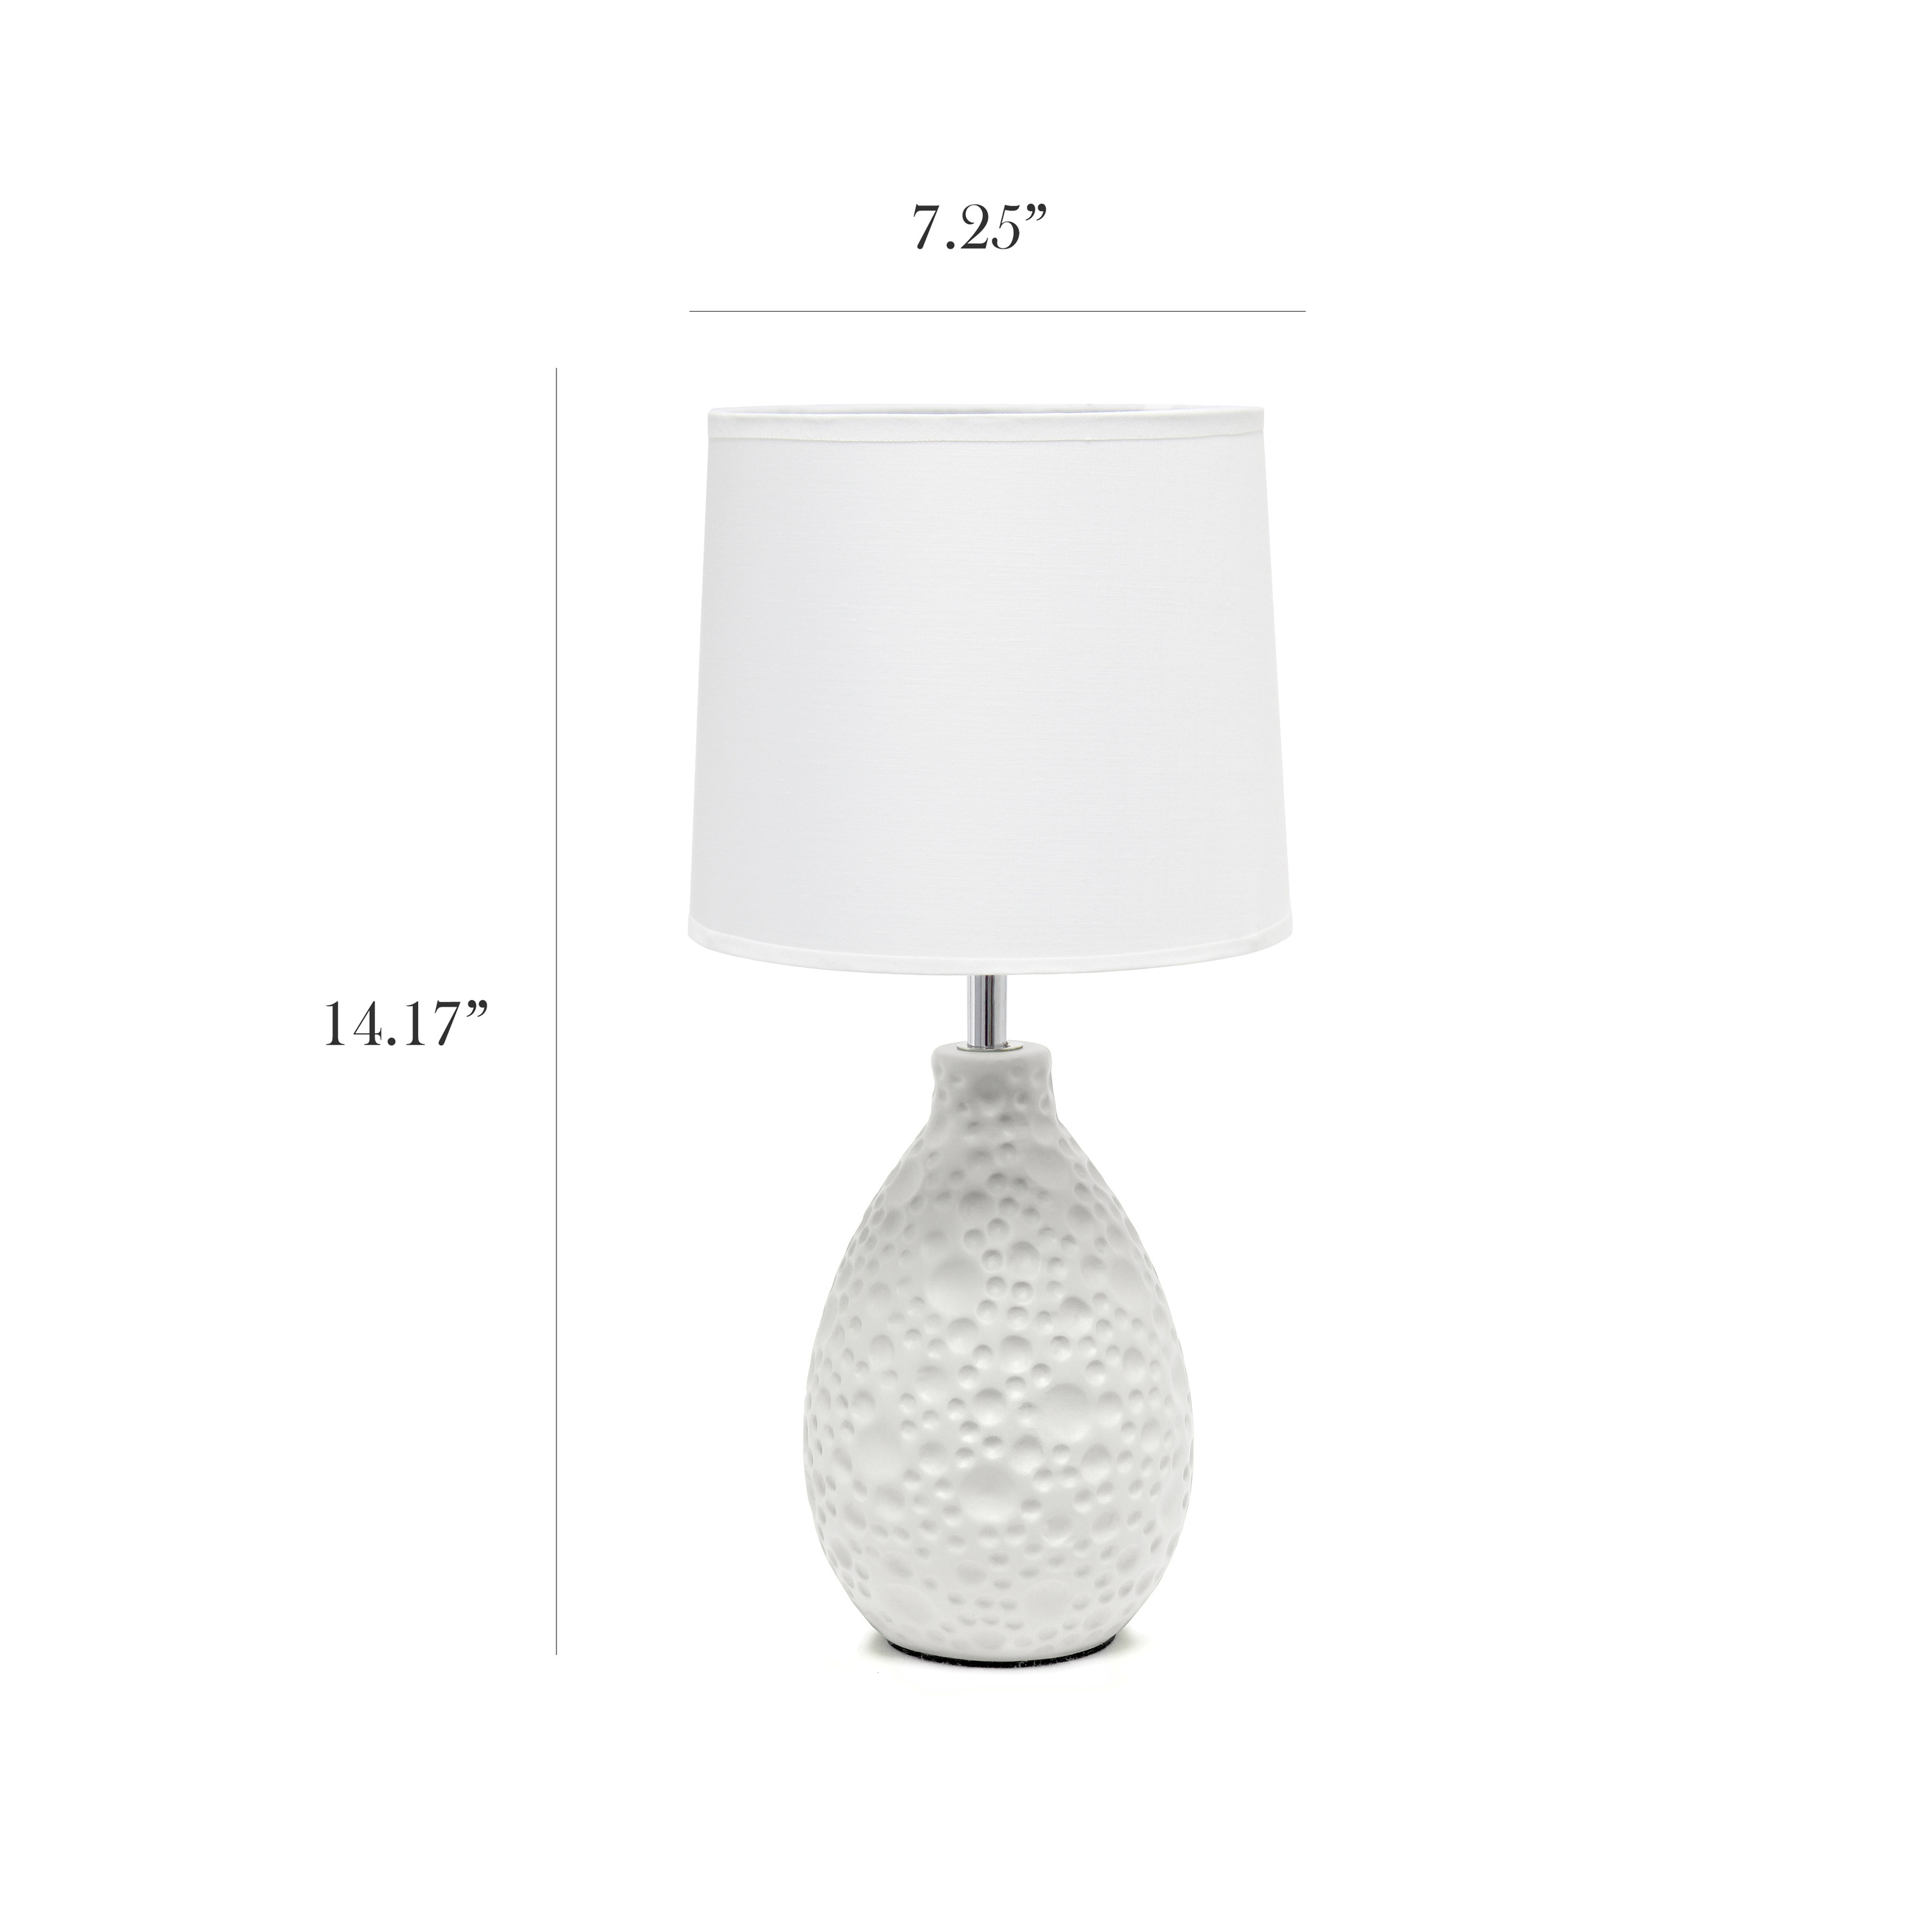 Simple Designs Textured Stucco Ceramic Oval Table Lamp - image 4 of 8